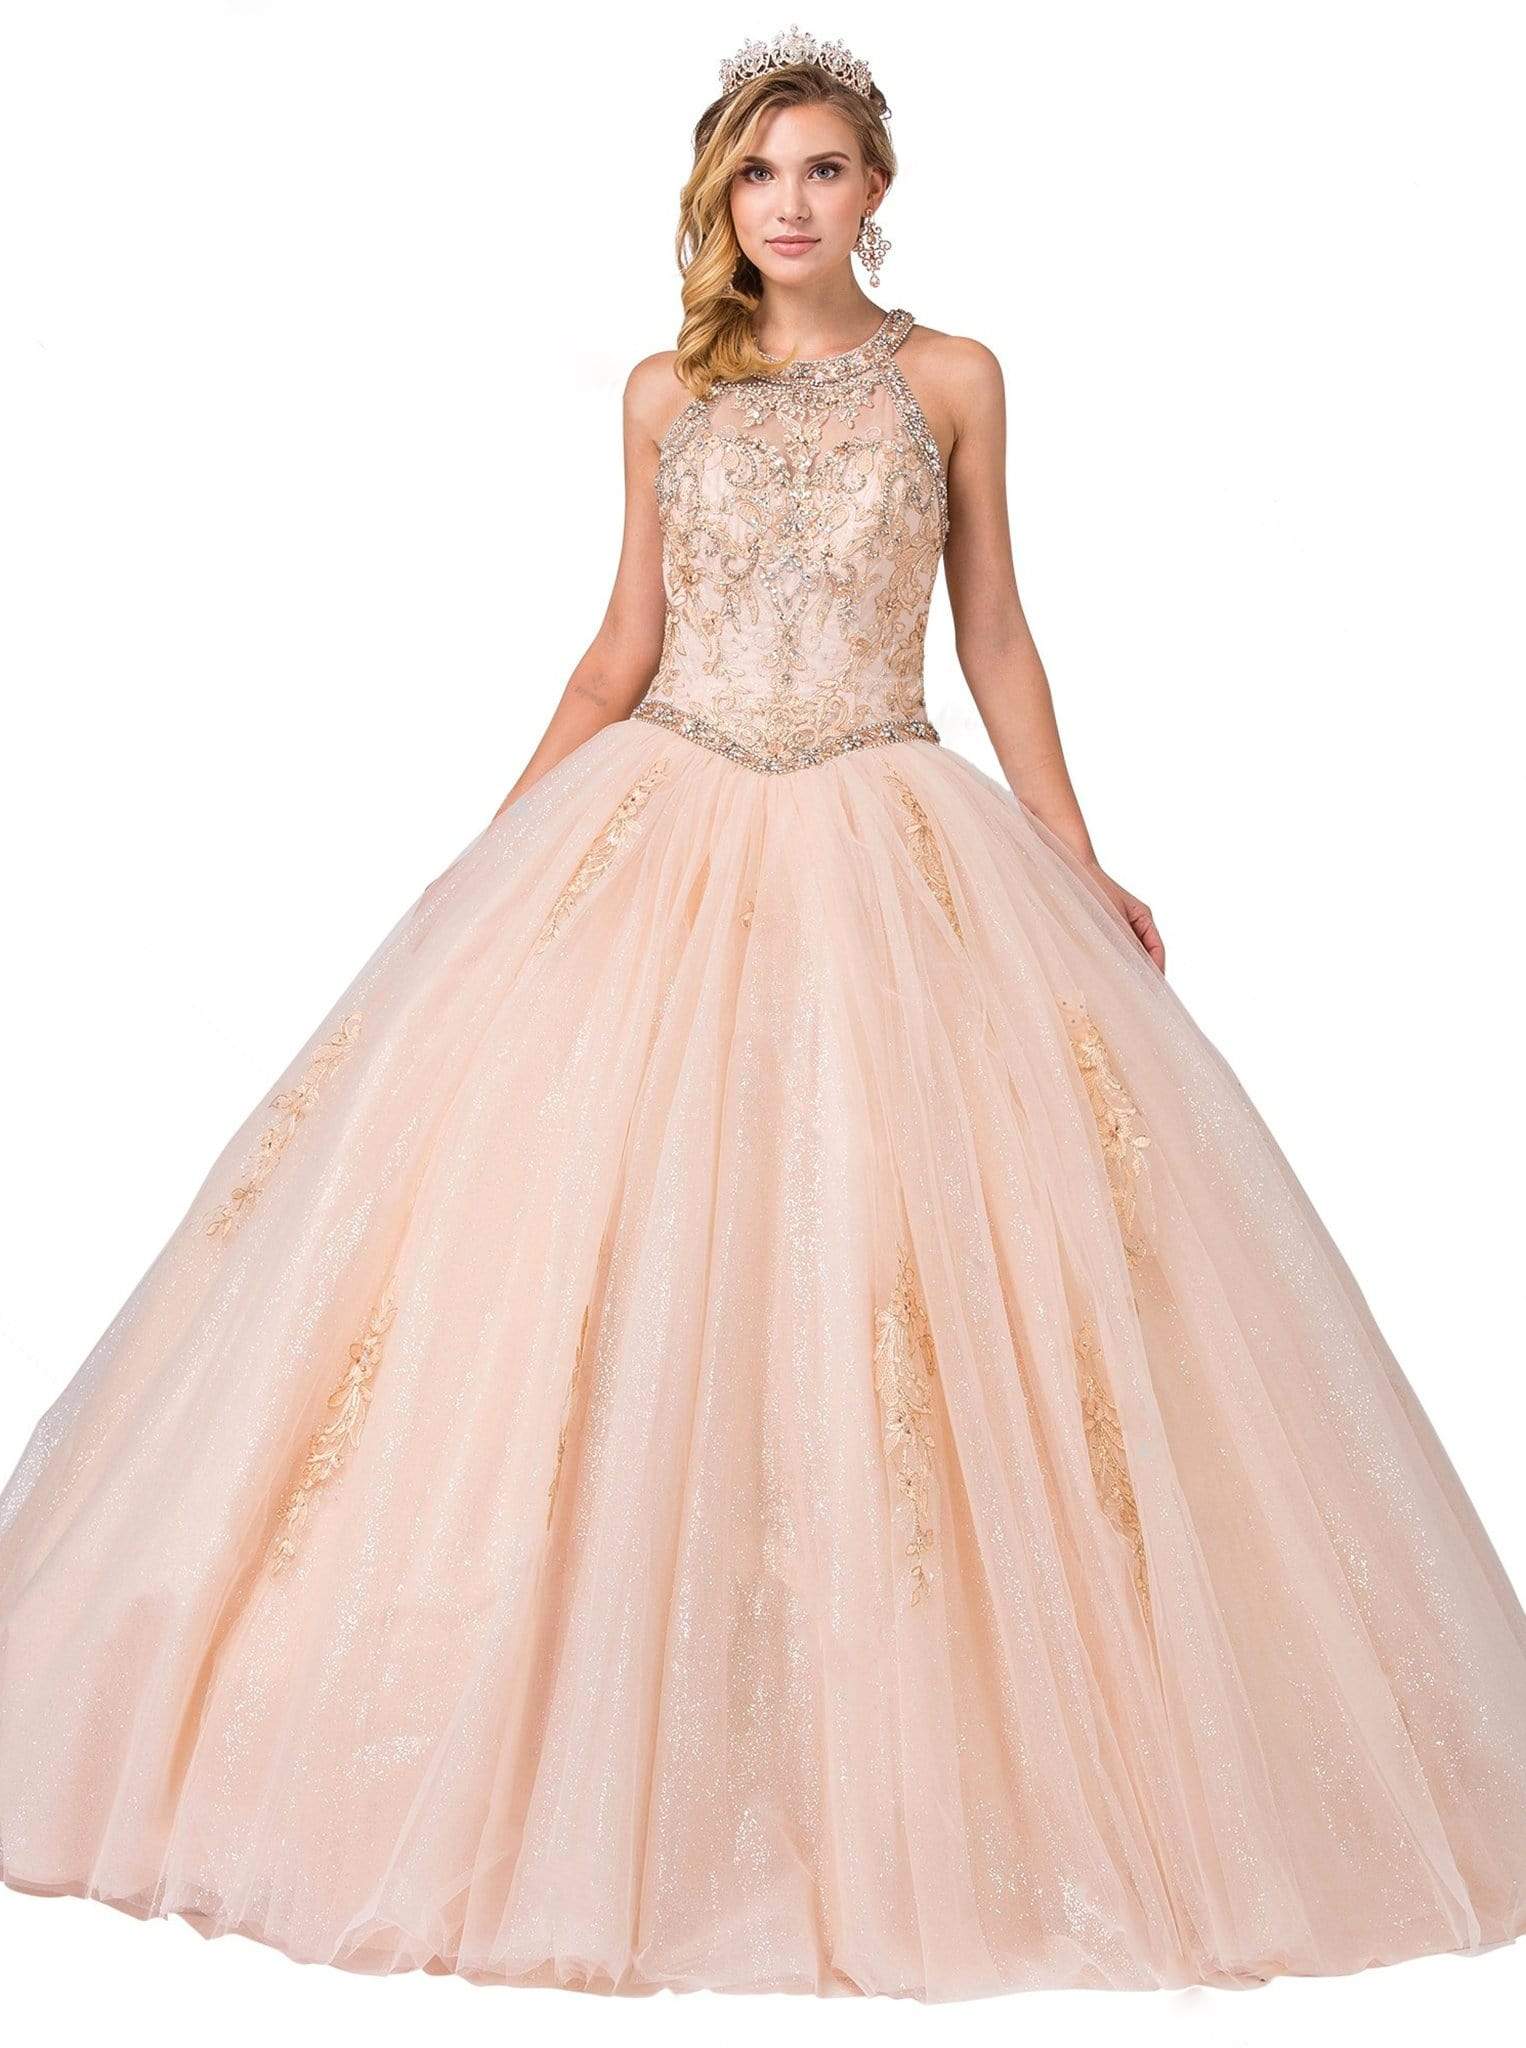 Dancing Queen - 1346 Jeweled Lace Appliqued Halter Ballgown
